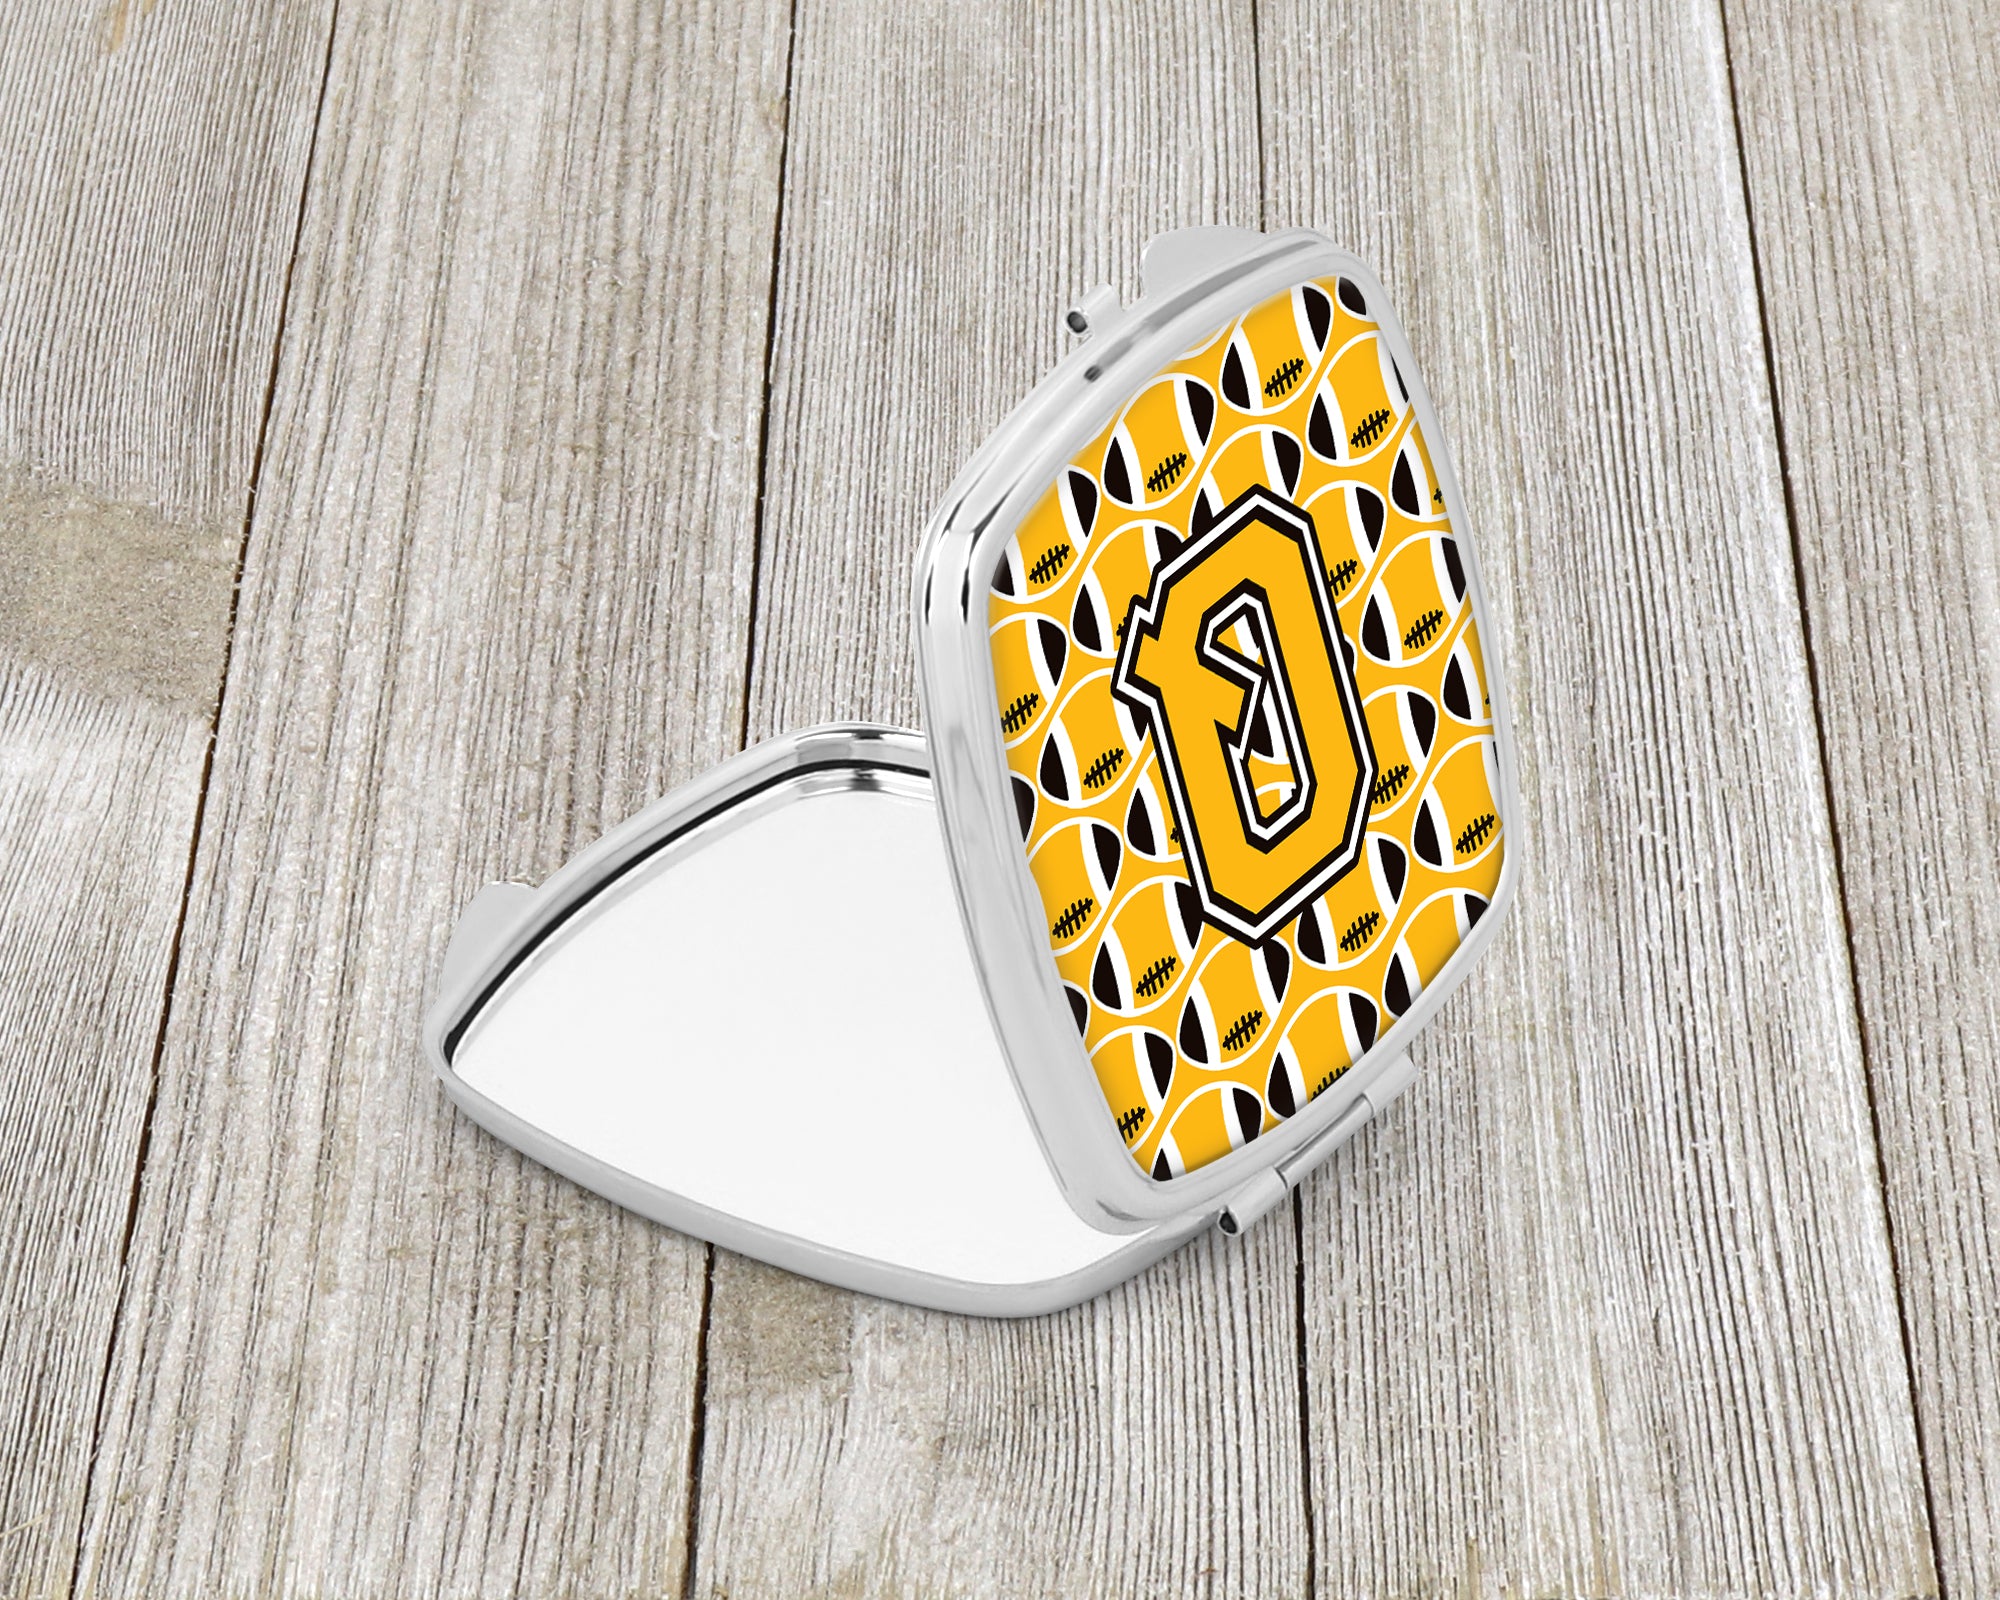 Letter Q Football Black, Old Gold and White Compact Mirror CJ1080-QSCM